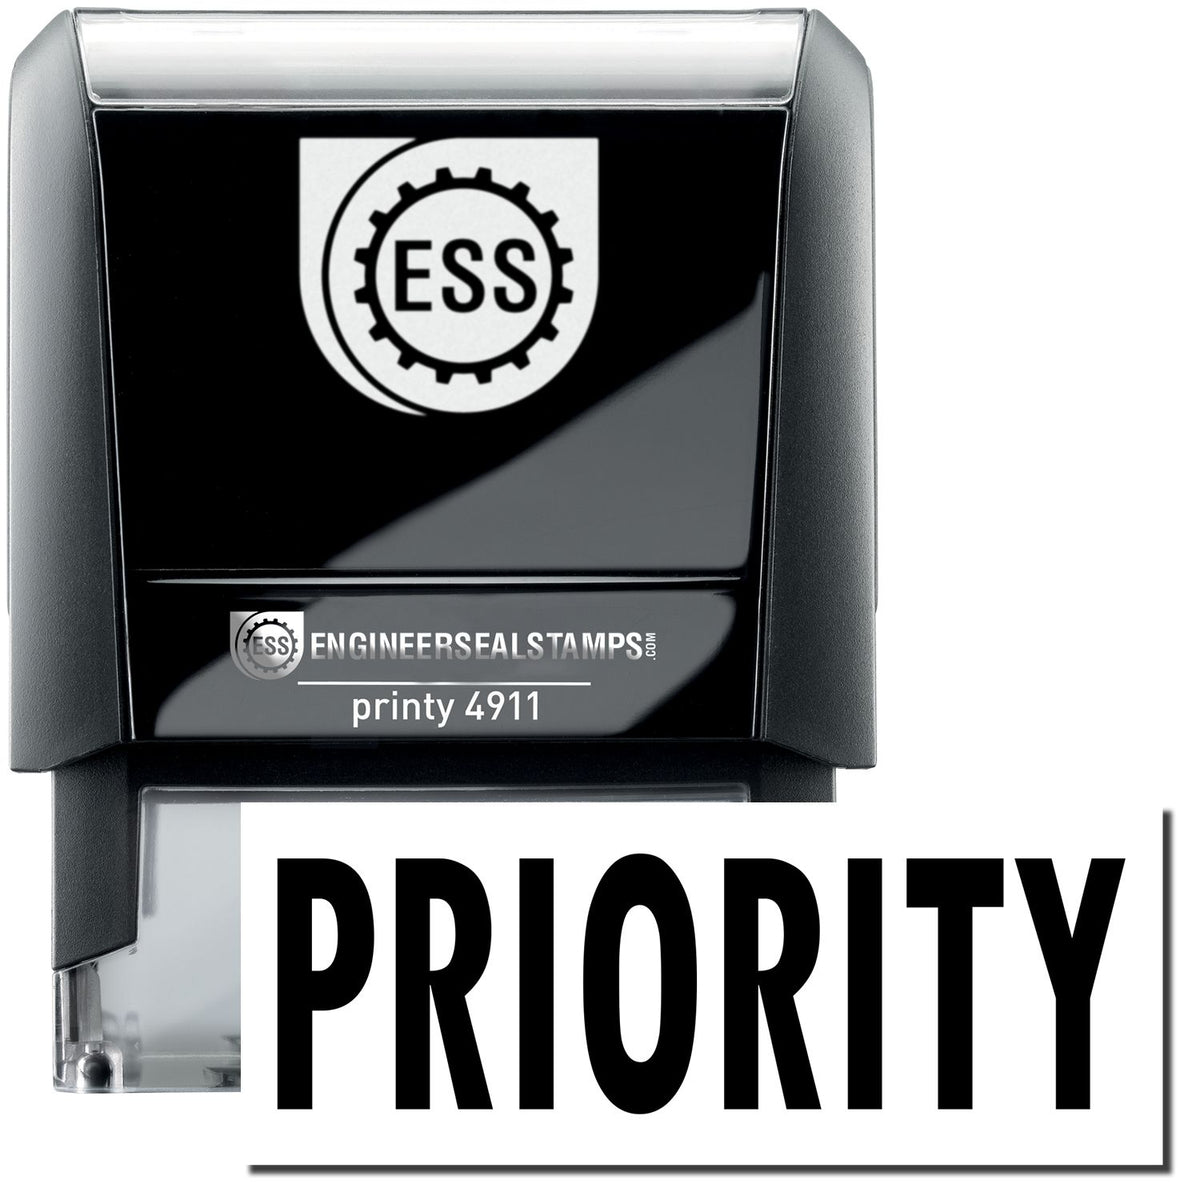 A self-inking stamp with a stamped image showing how the text &quot;PRIORITY&quot; is displayed after stamping.